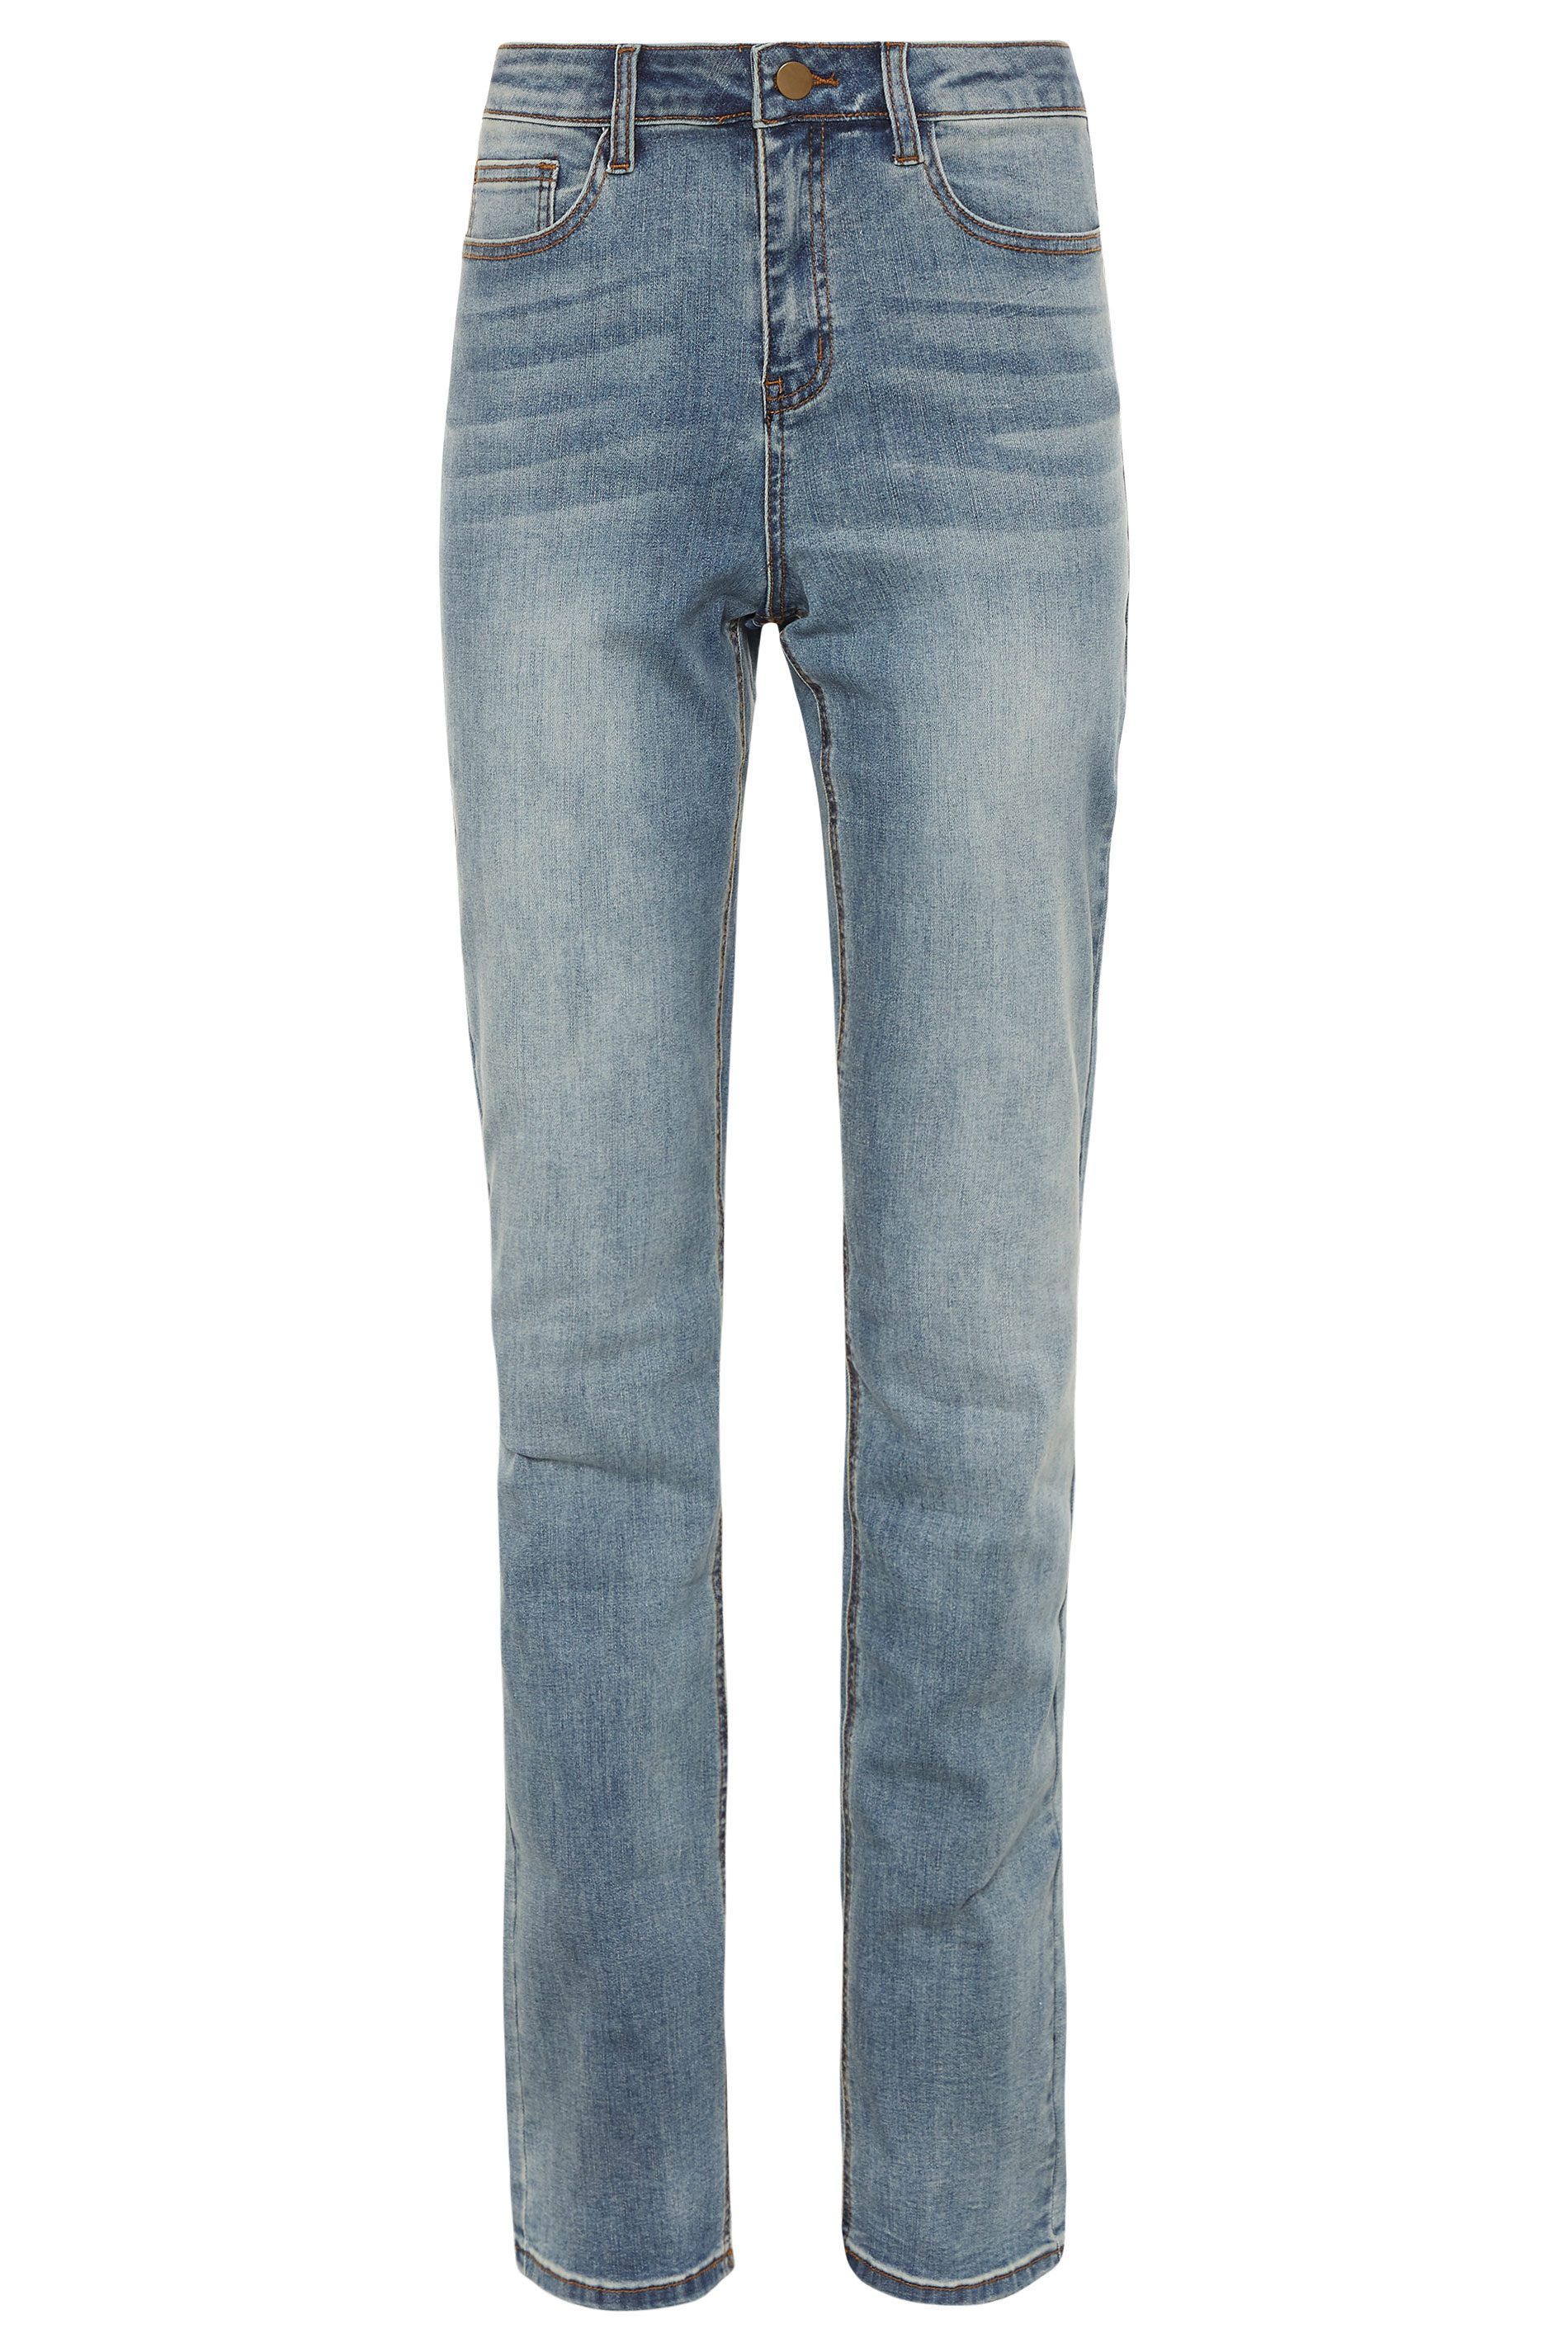 Blue Light Wash Straight Mid Rise Jeans | Long Tall Sally